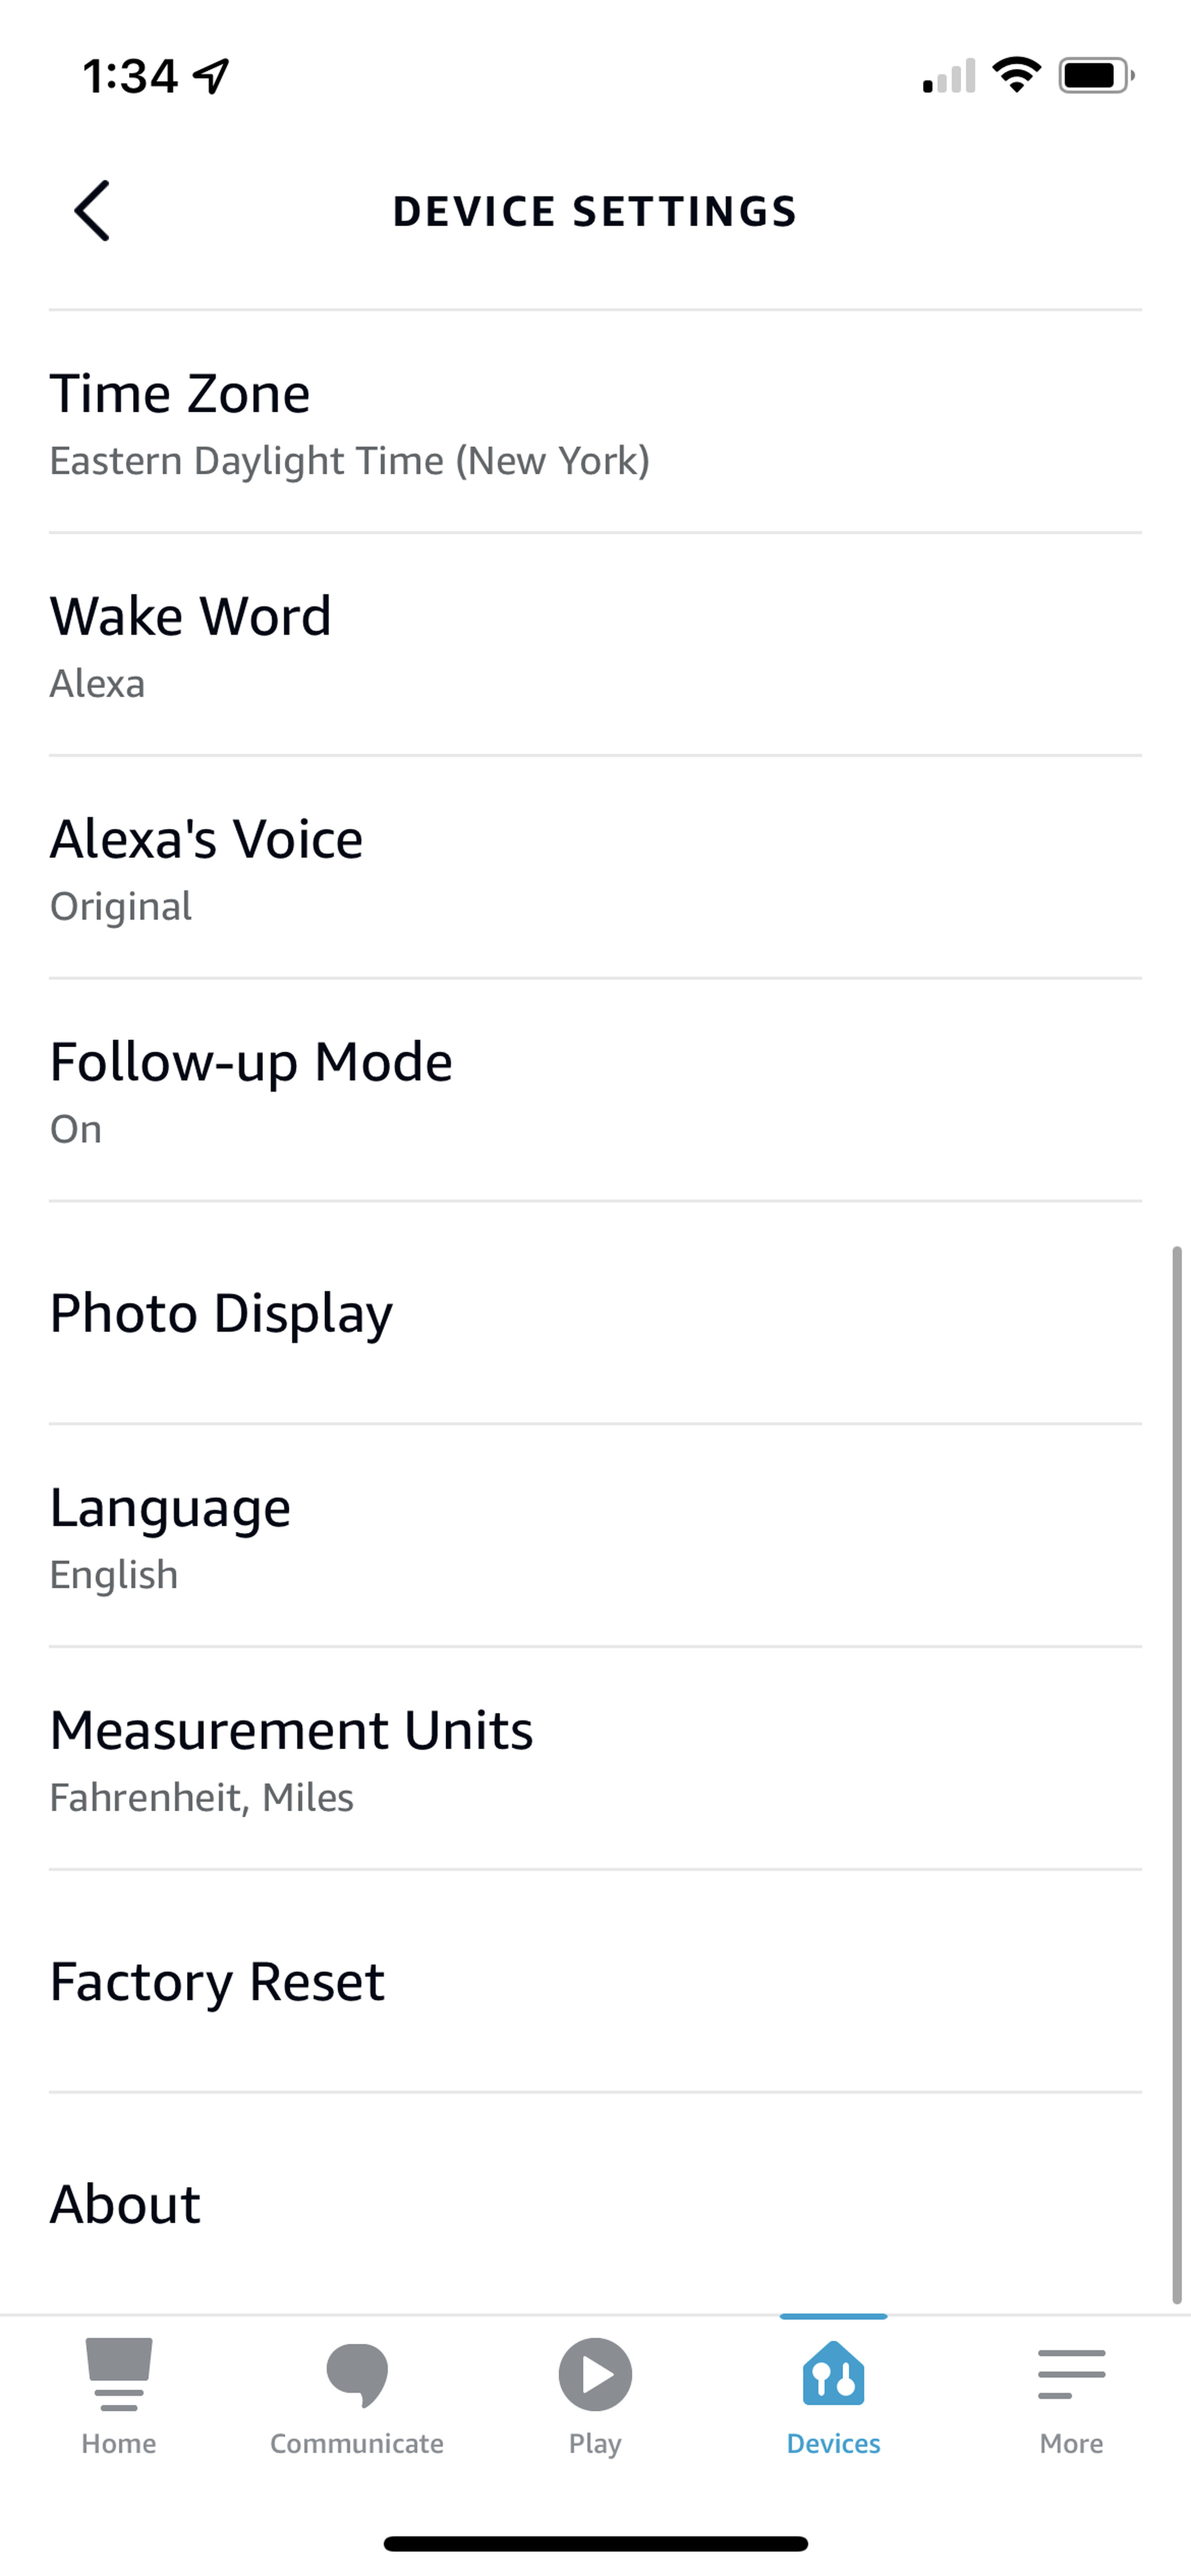 <em>Scroll down until you see Alexa’s Voice options, tap that.</em>